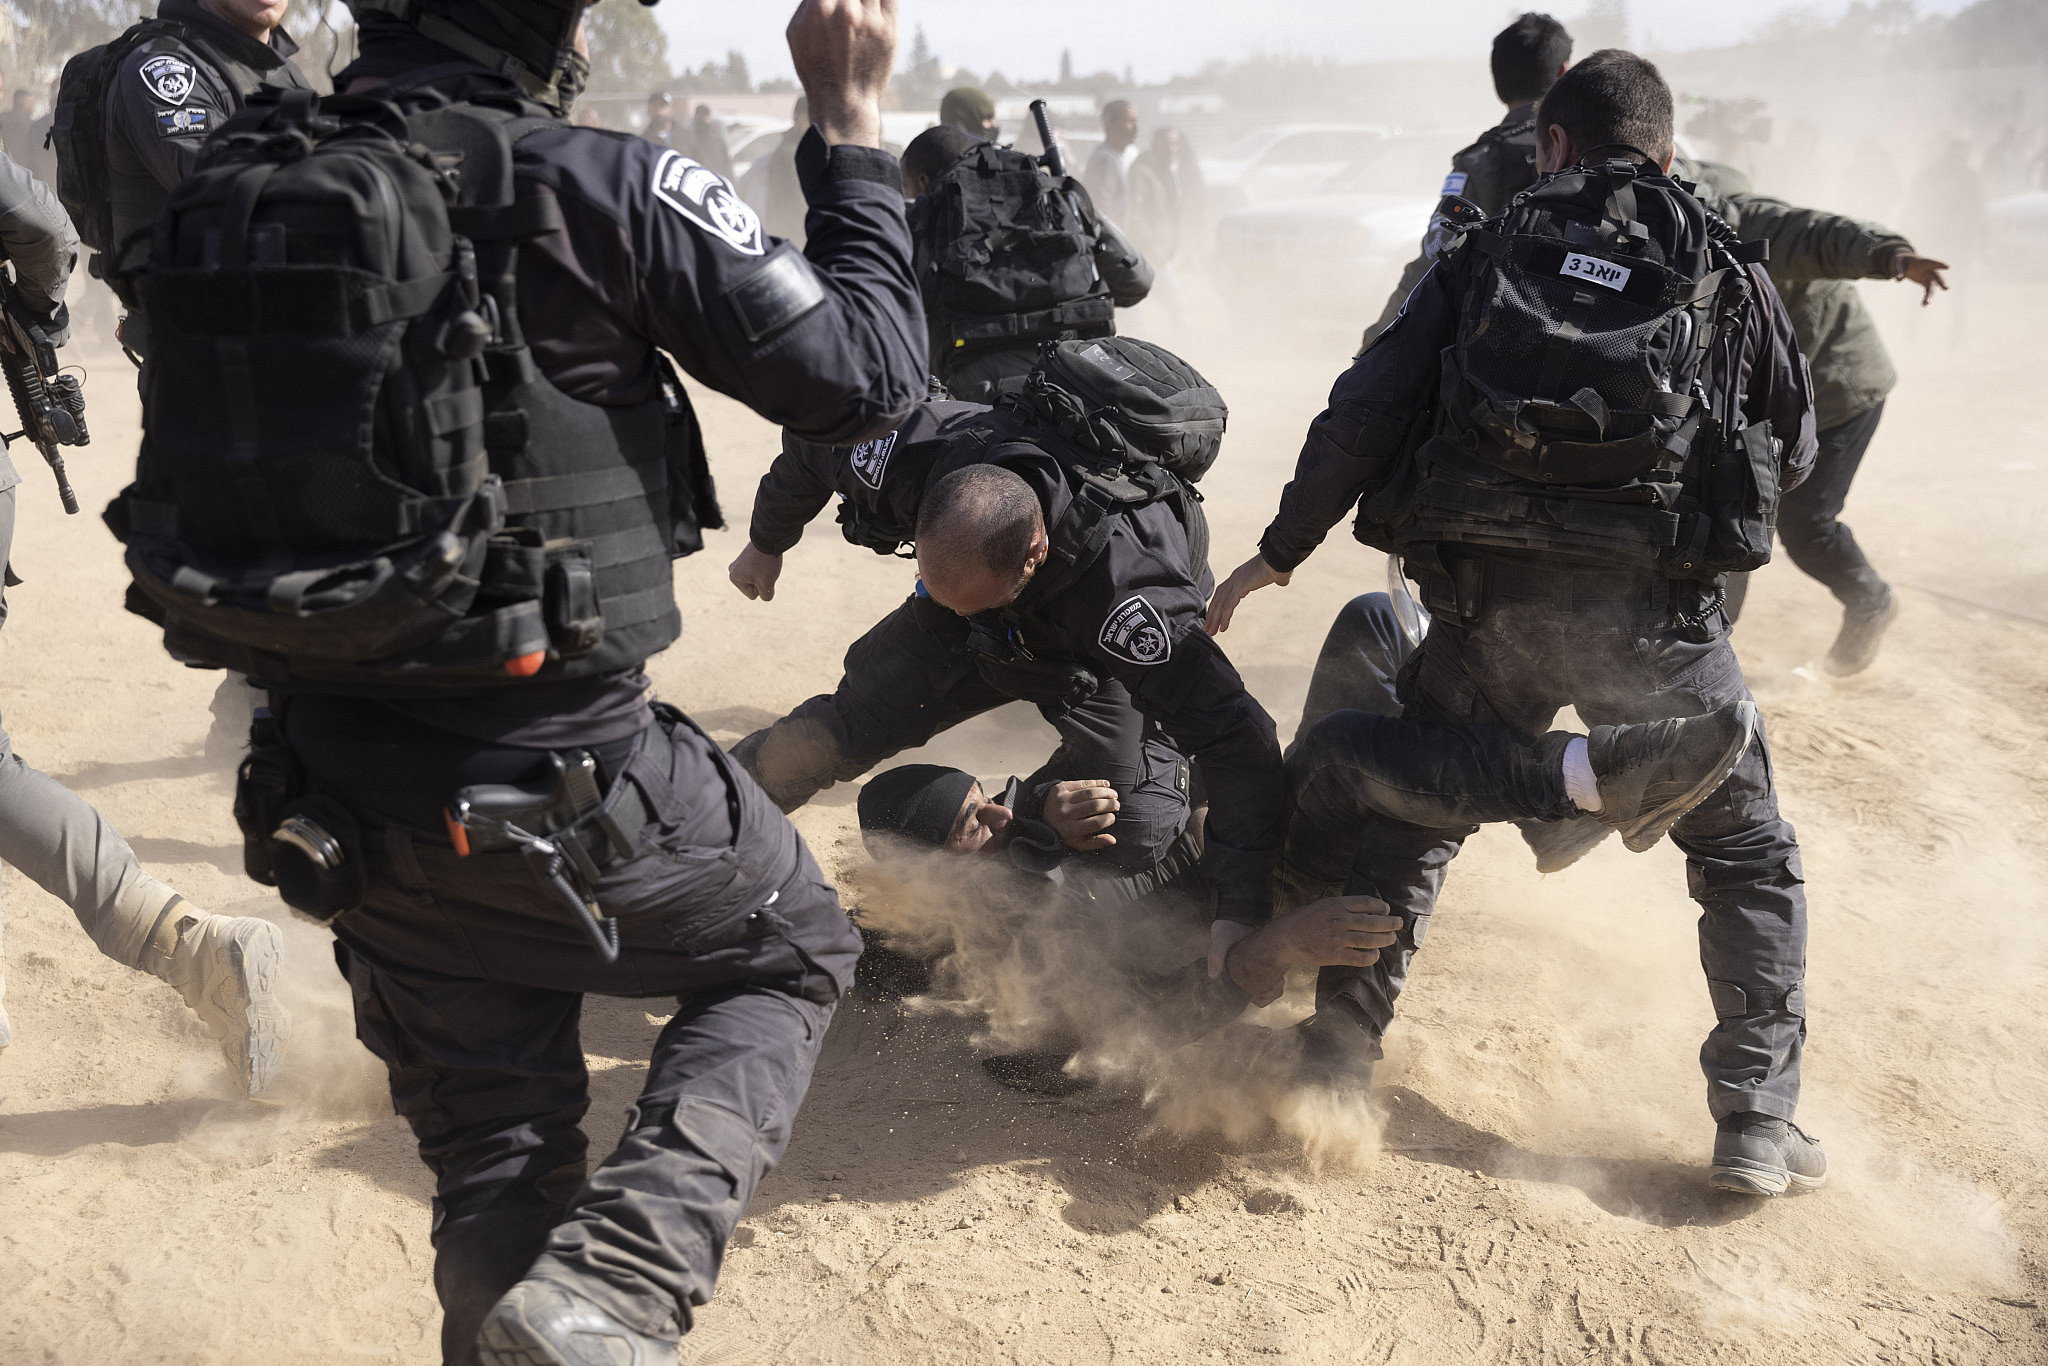 Palestinian Bedouin citizens of Israel try to stop Israeli bulldozers being used in a tree-planting program carried out by the Jewish National Fund (JNF) on the land of the village of Sa’wa al-Atrash in the Naqab/Negev, January 12, 2022. (Oren Ziv/Activestills)